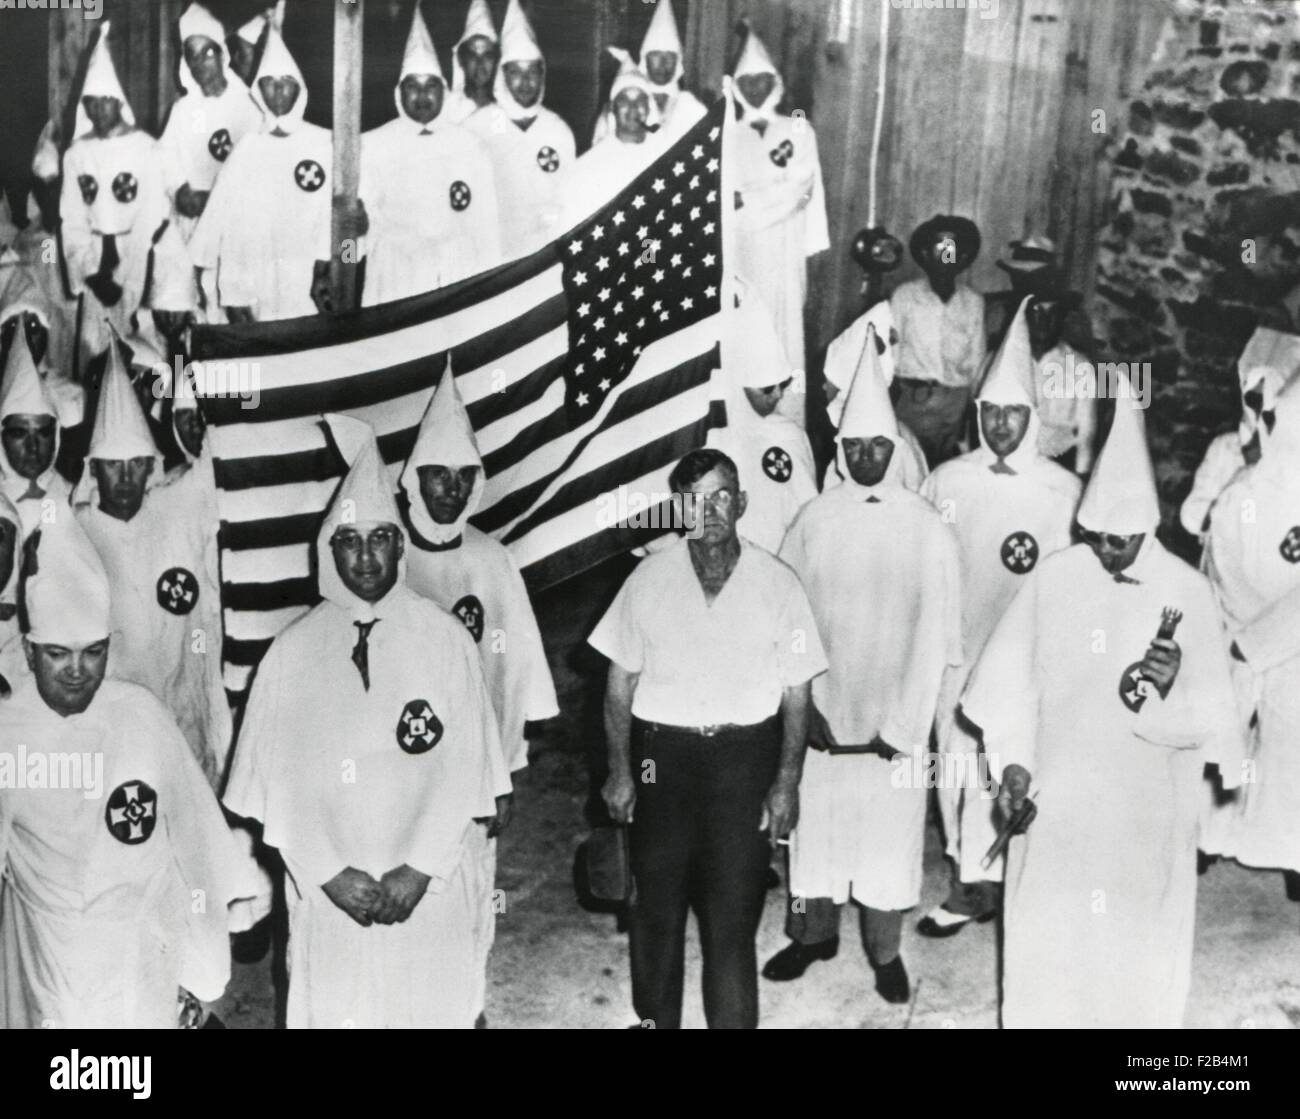 58 of the advertised 1000 KKK members about to parade unmasked in Pell City, Alabama. August 22, 1949. In compliance with a new Stock Photo